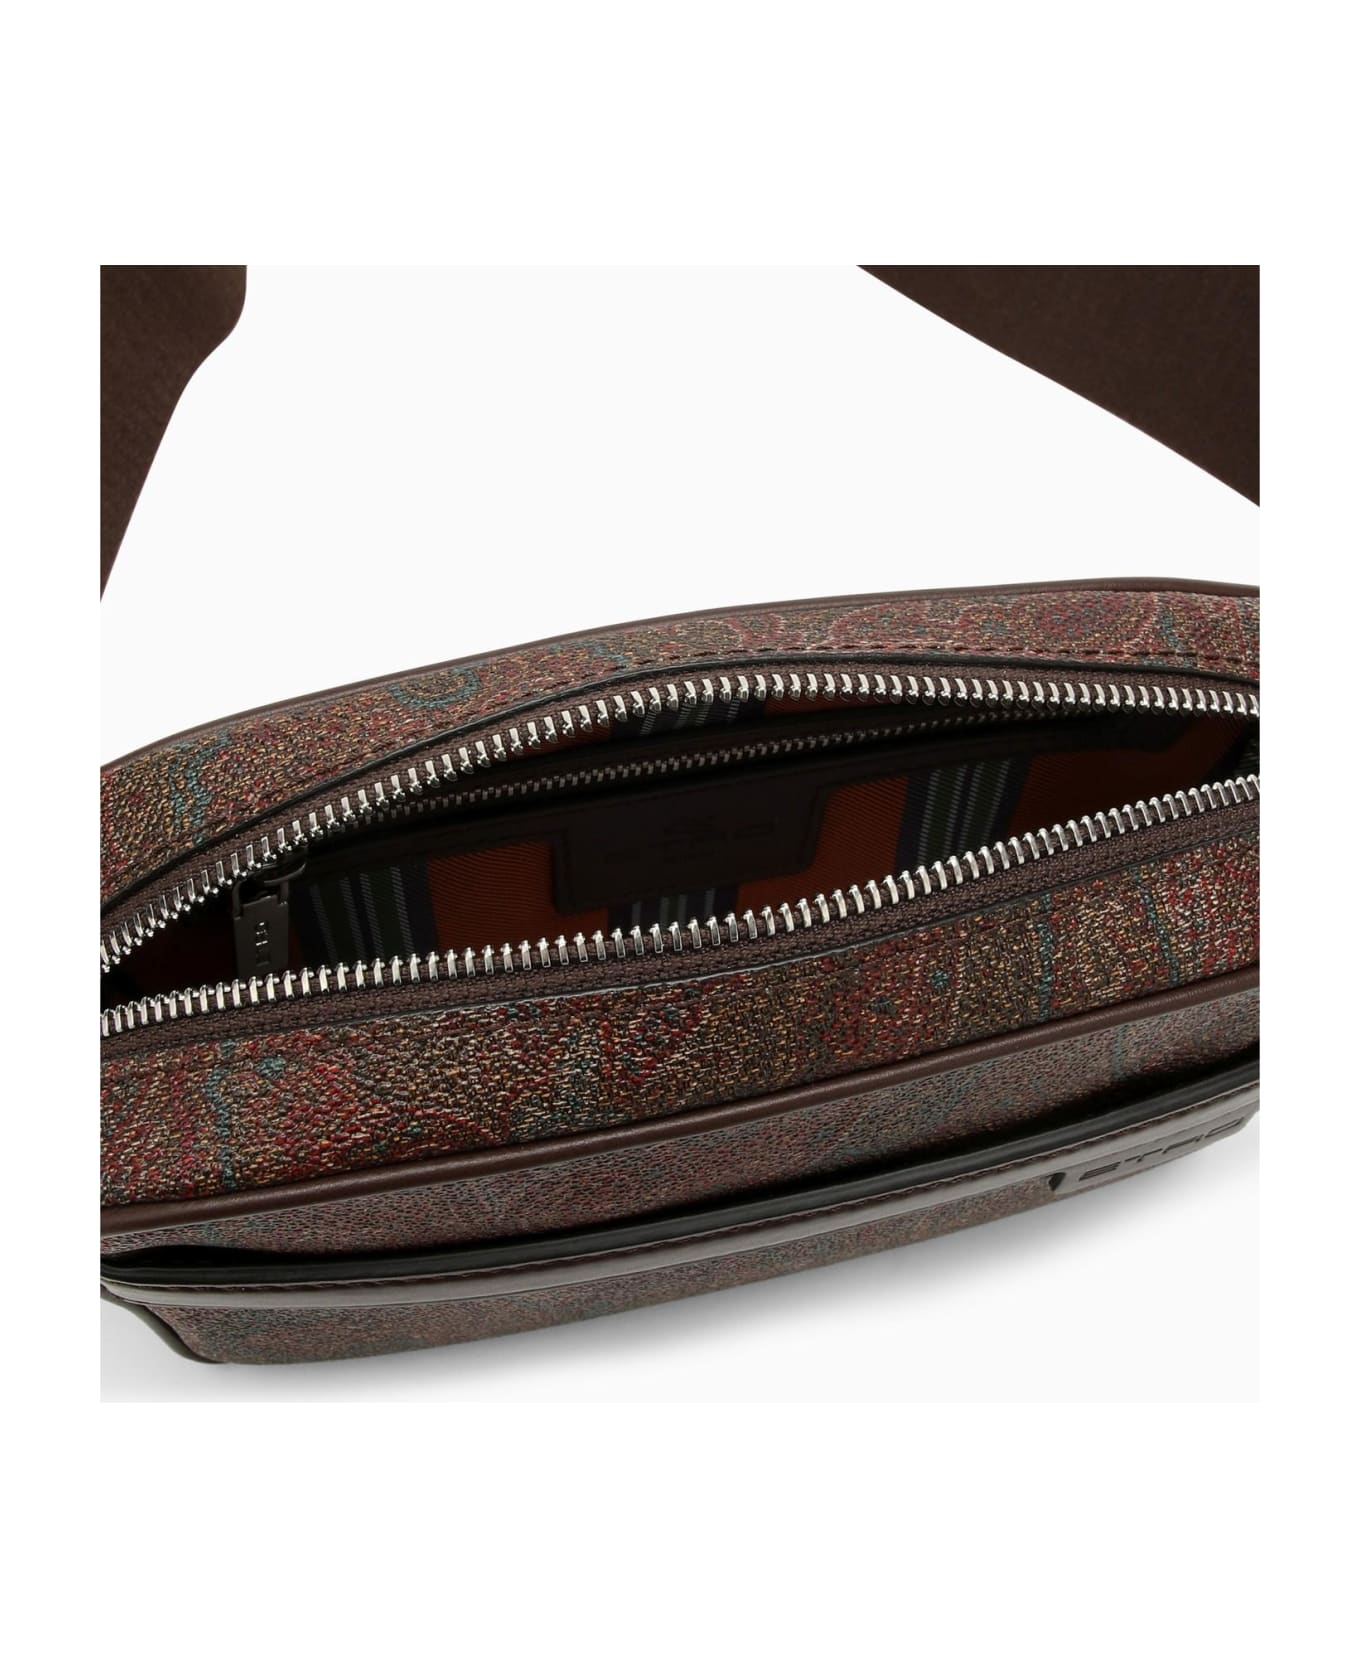 Etro Paisley Mini Bag In Coated Canvas - BROWN